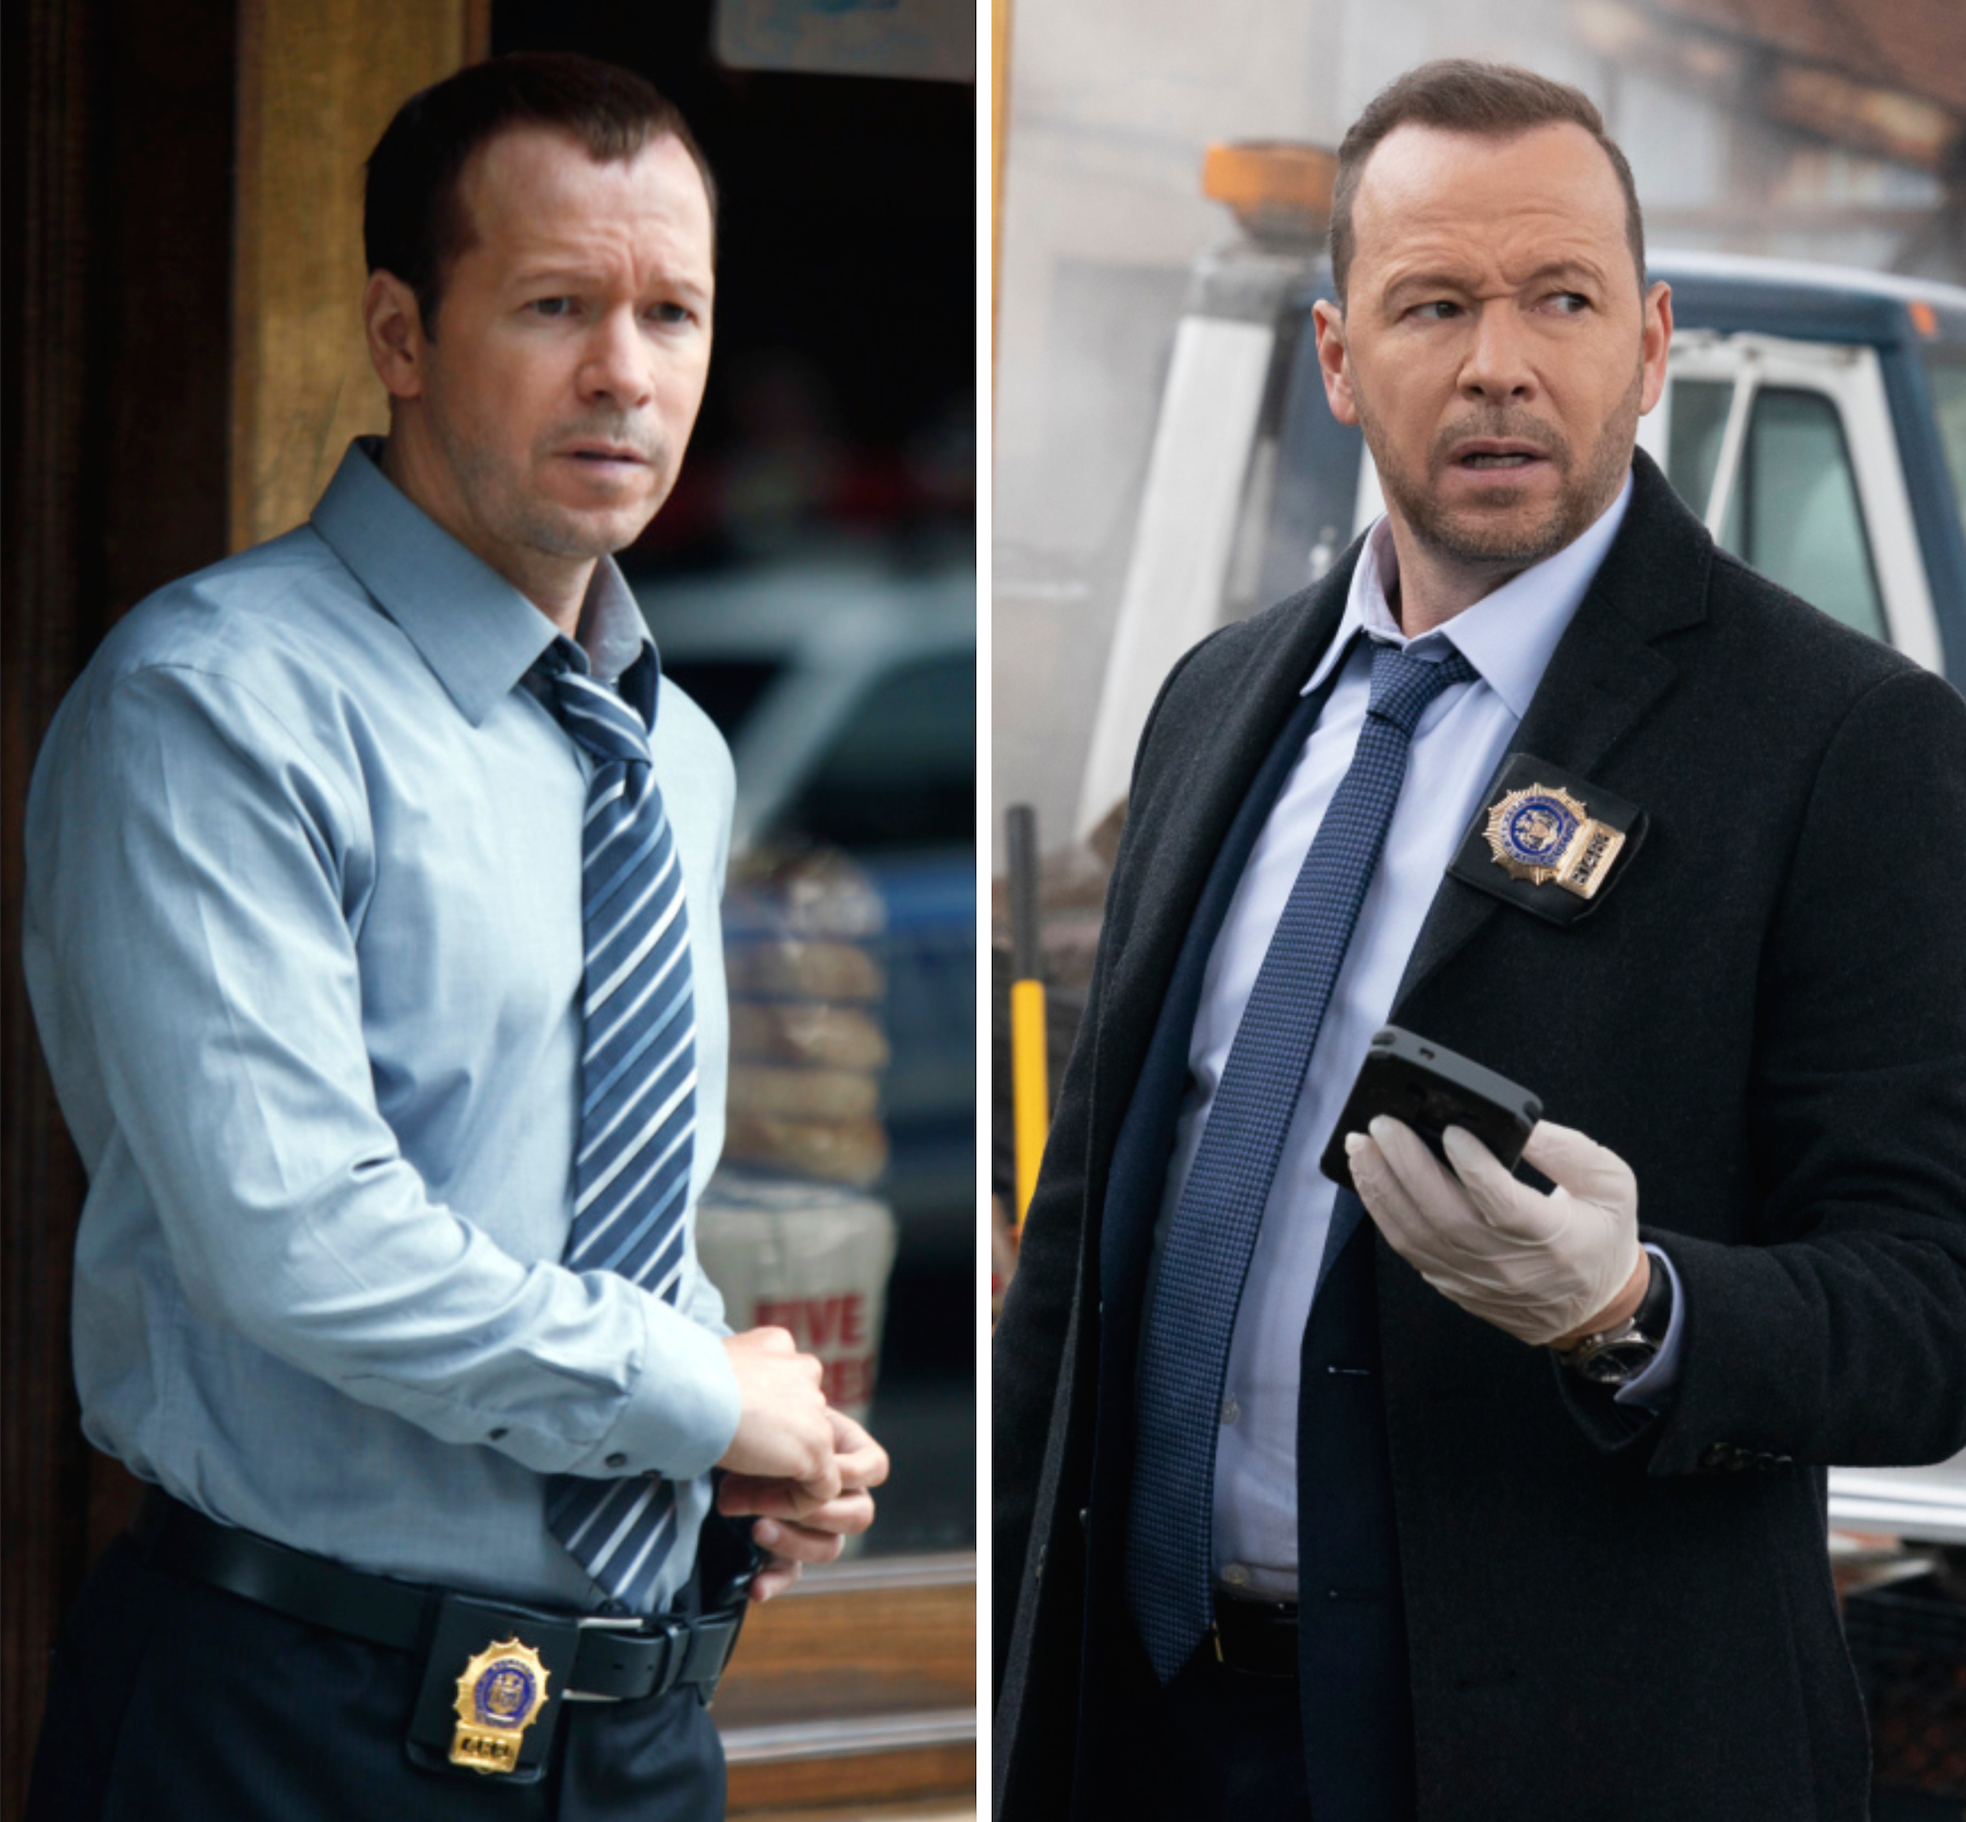 How much does Donnie Wahlberg make per episode on Blue Bloods?